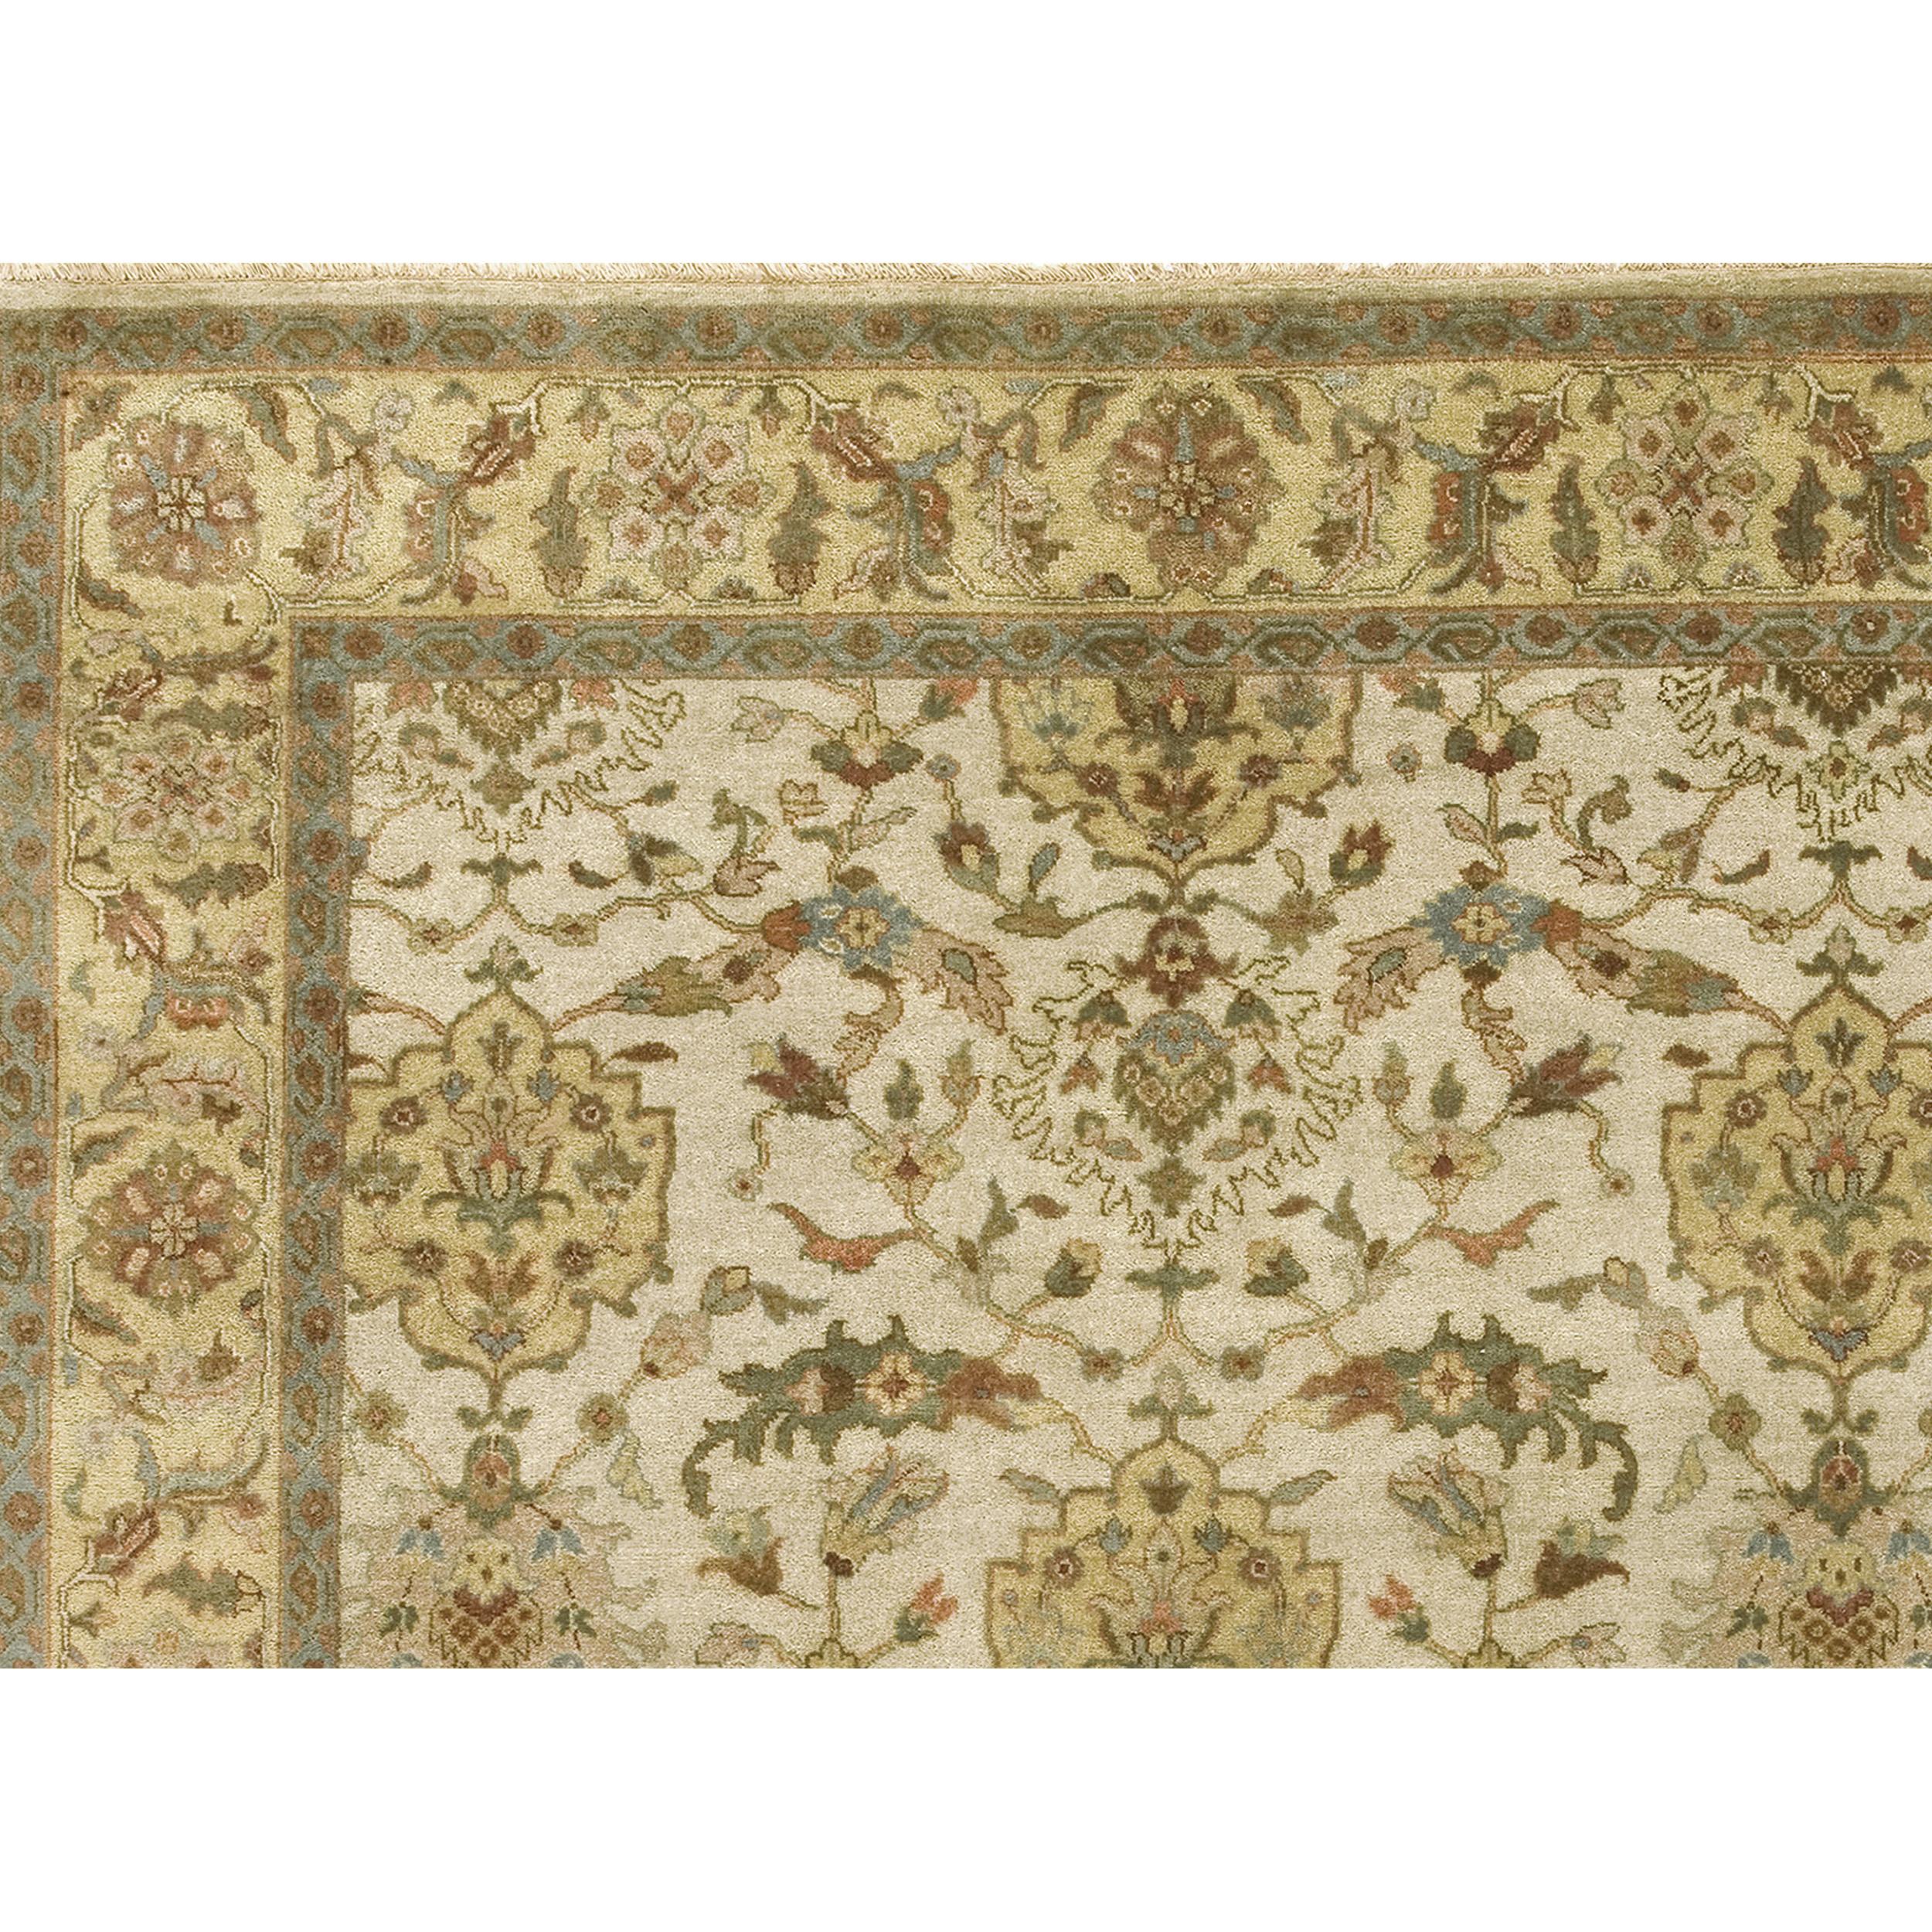 Meticulously crafted, this rug employs the most intricate traditional weaving techniques in India, guided by the expertise of skilled artisans. Crafted from the finest, most exquisite wools, renowned for their exceptional quality and softness. The